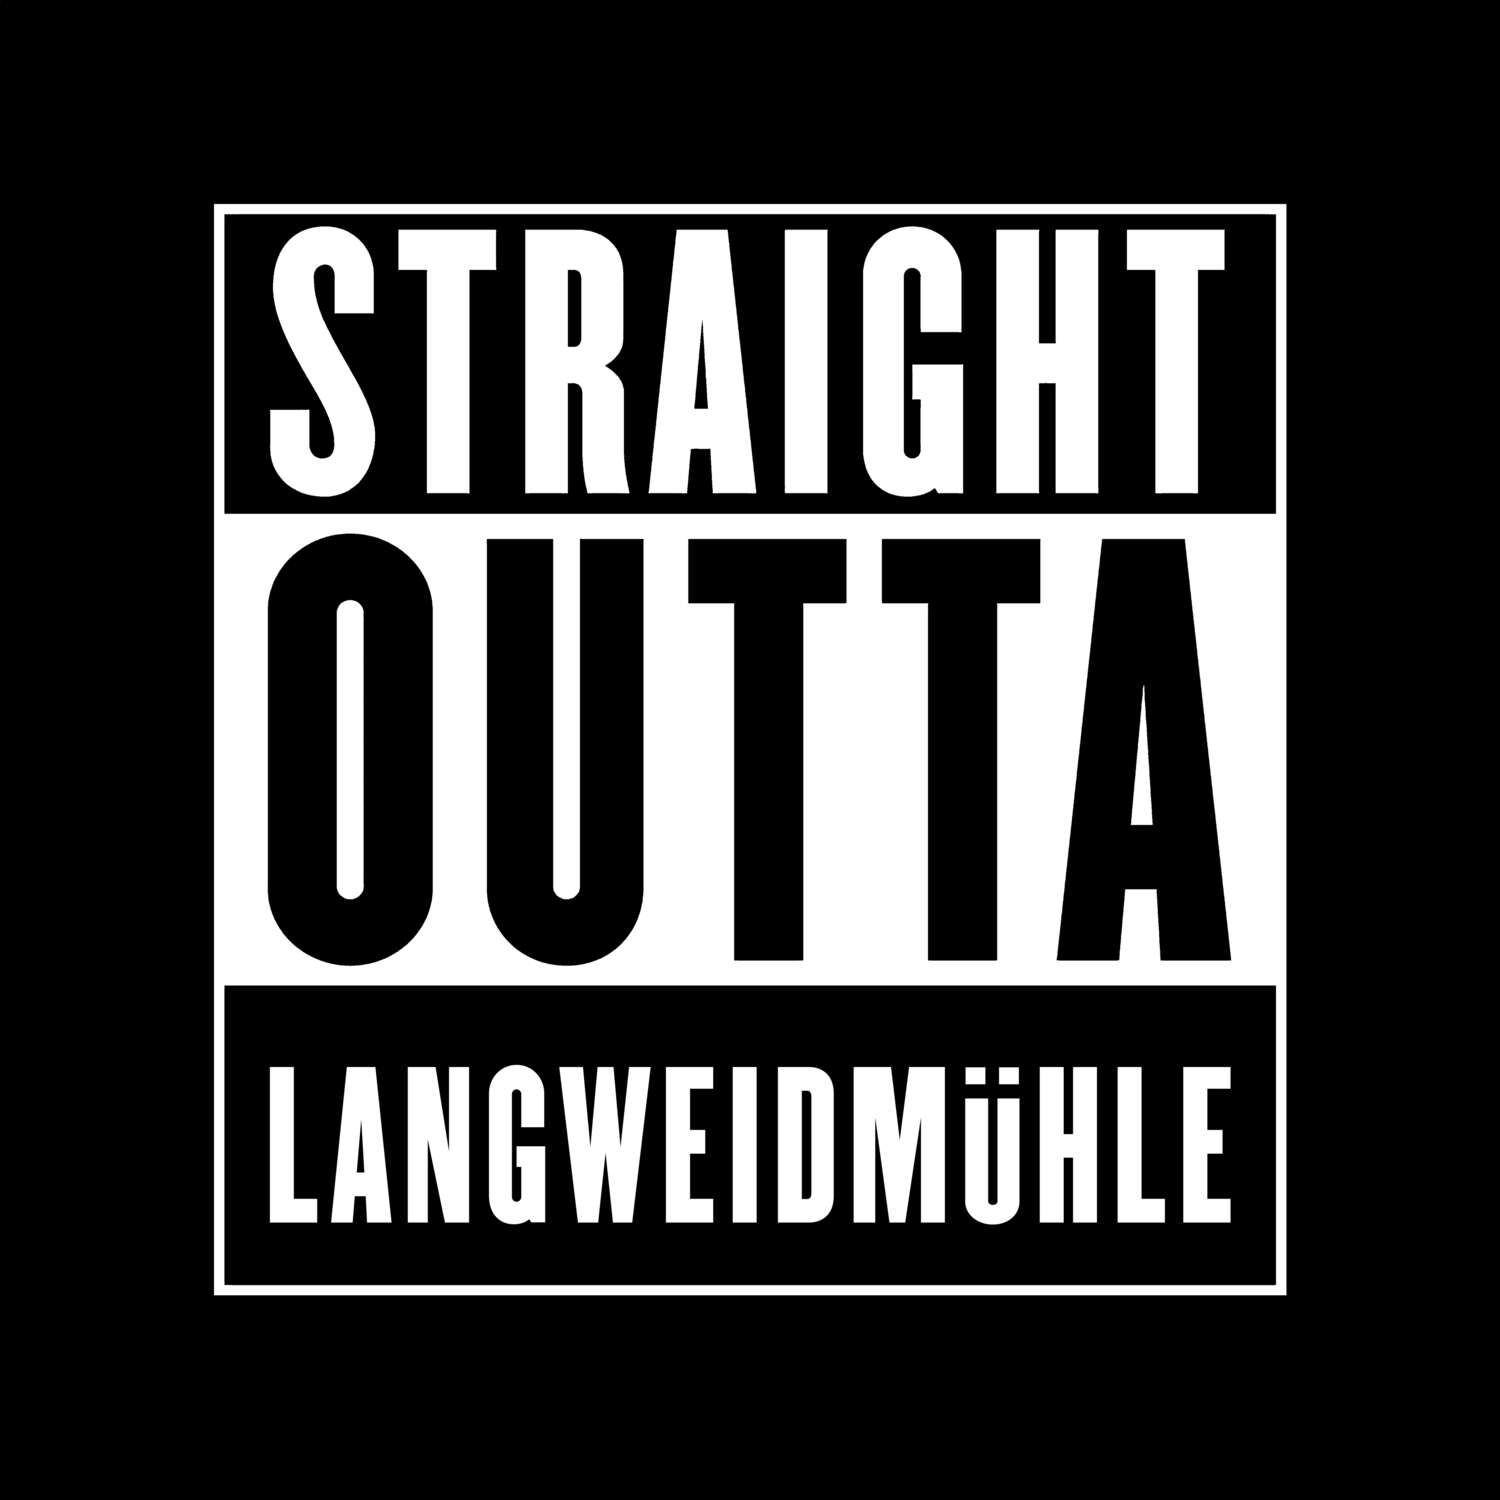 Langweidmühle T-Shirt »Straight Outta«